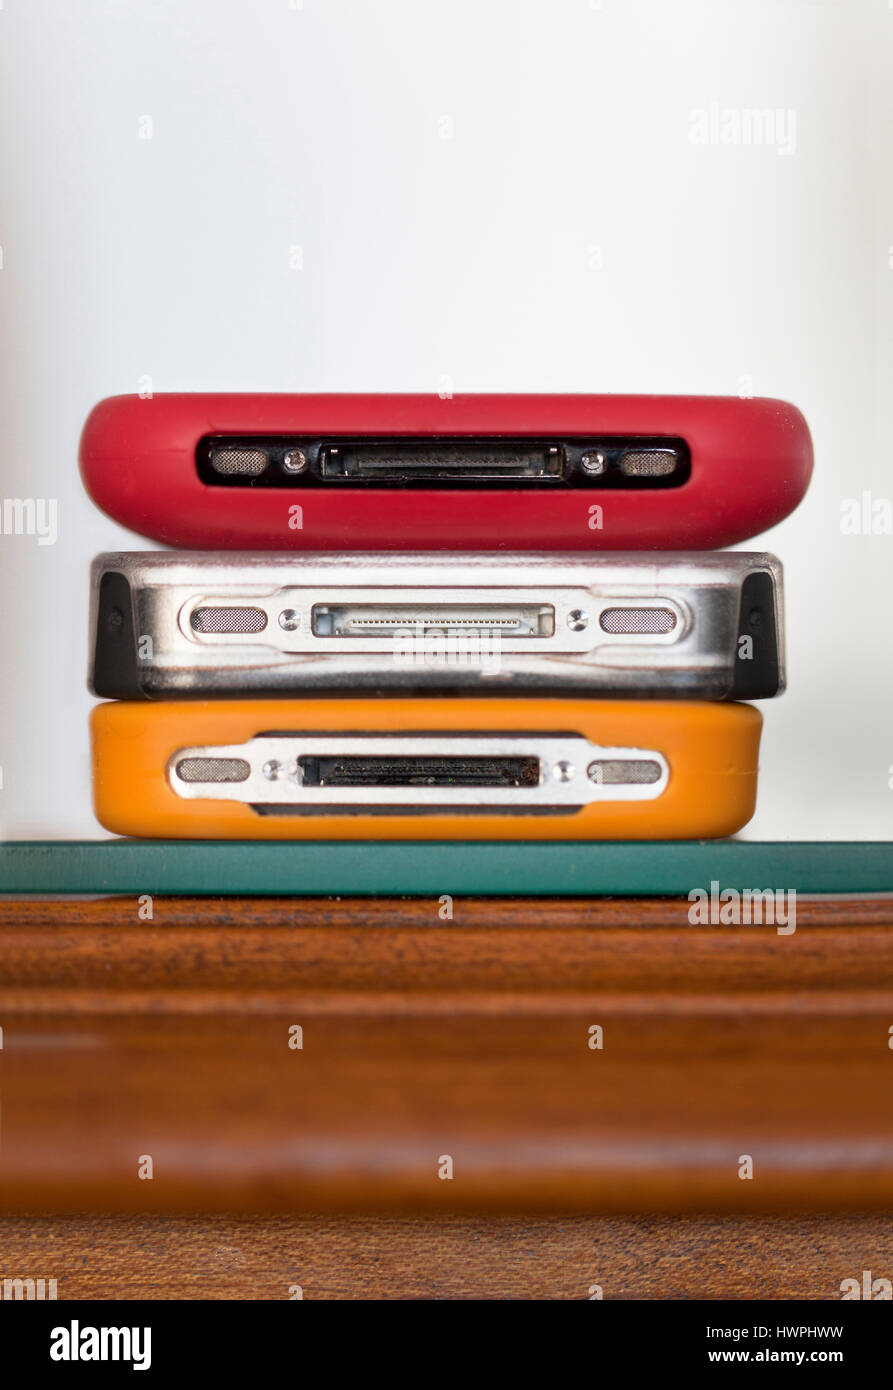 Mobile devices charging slot Stock Photo